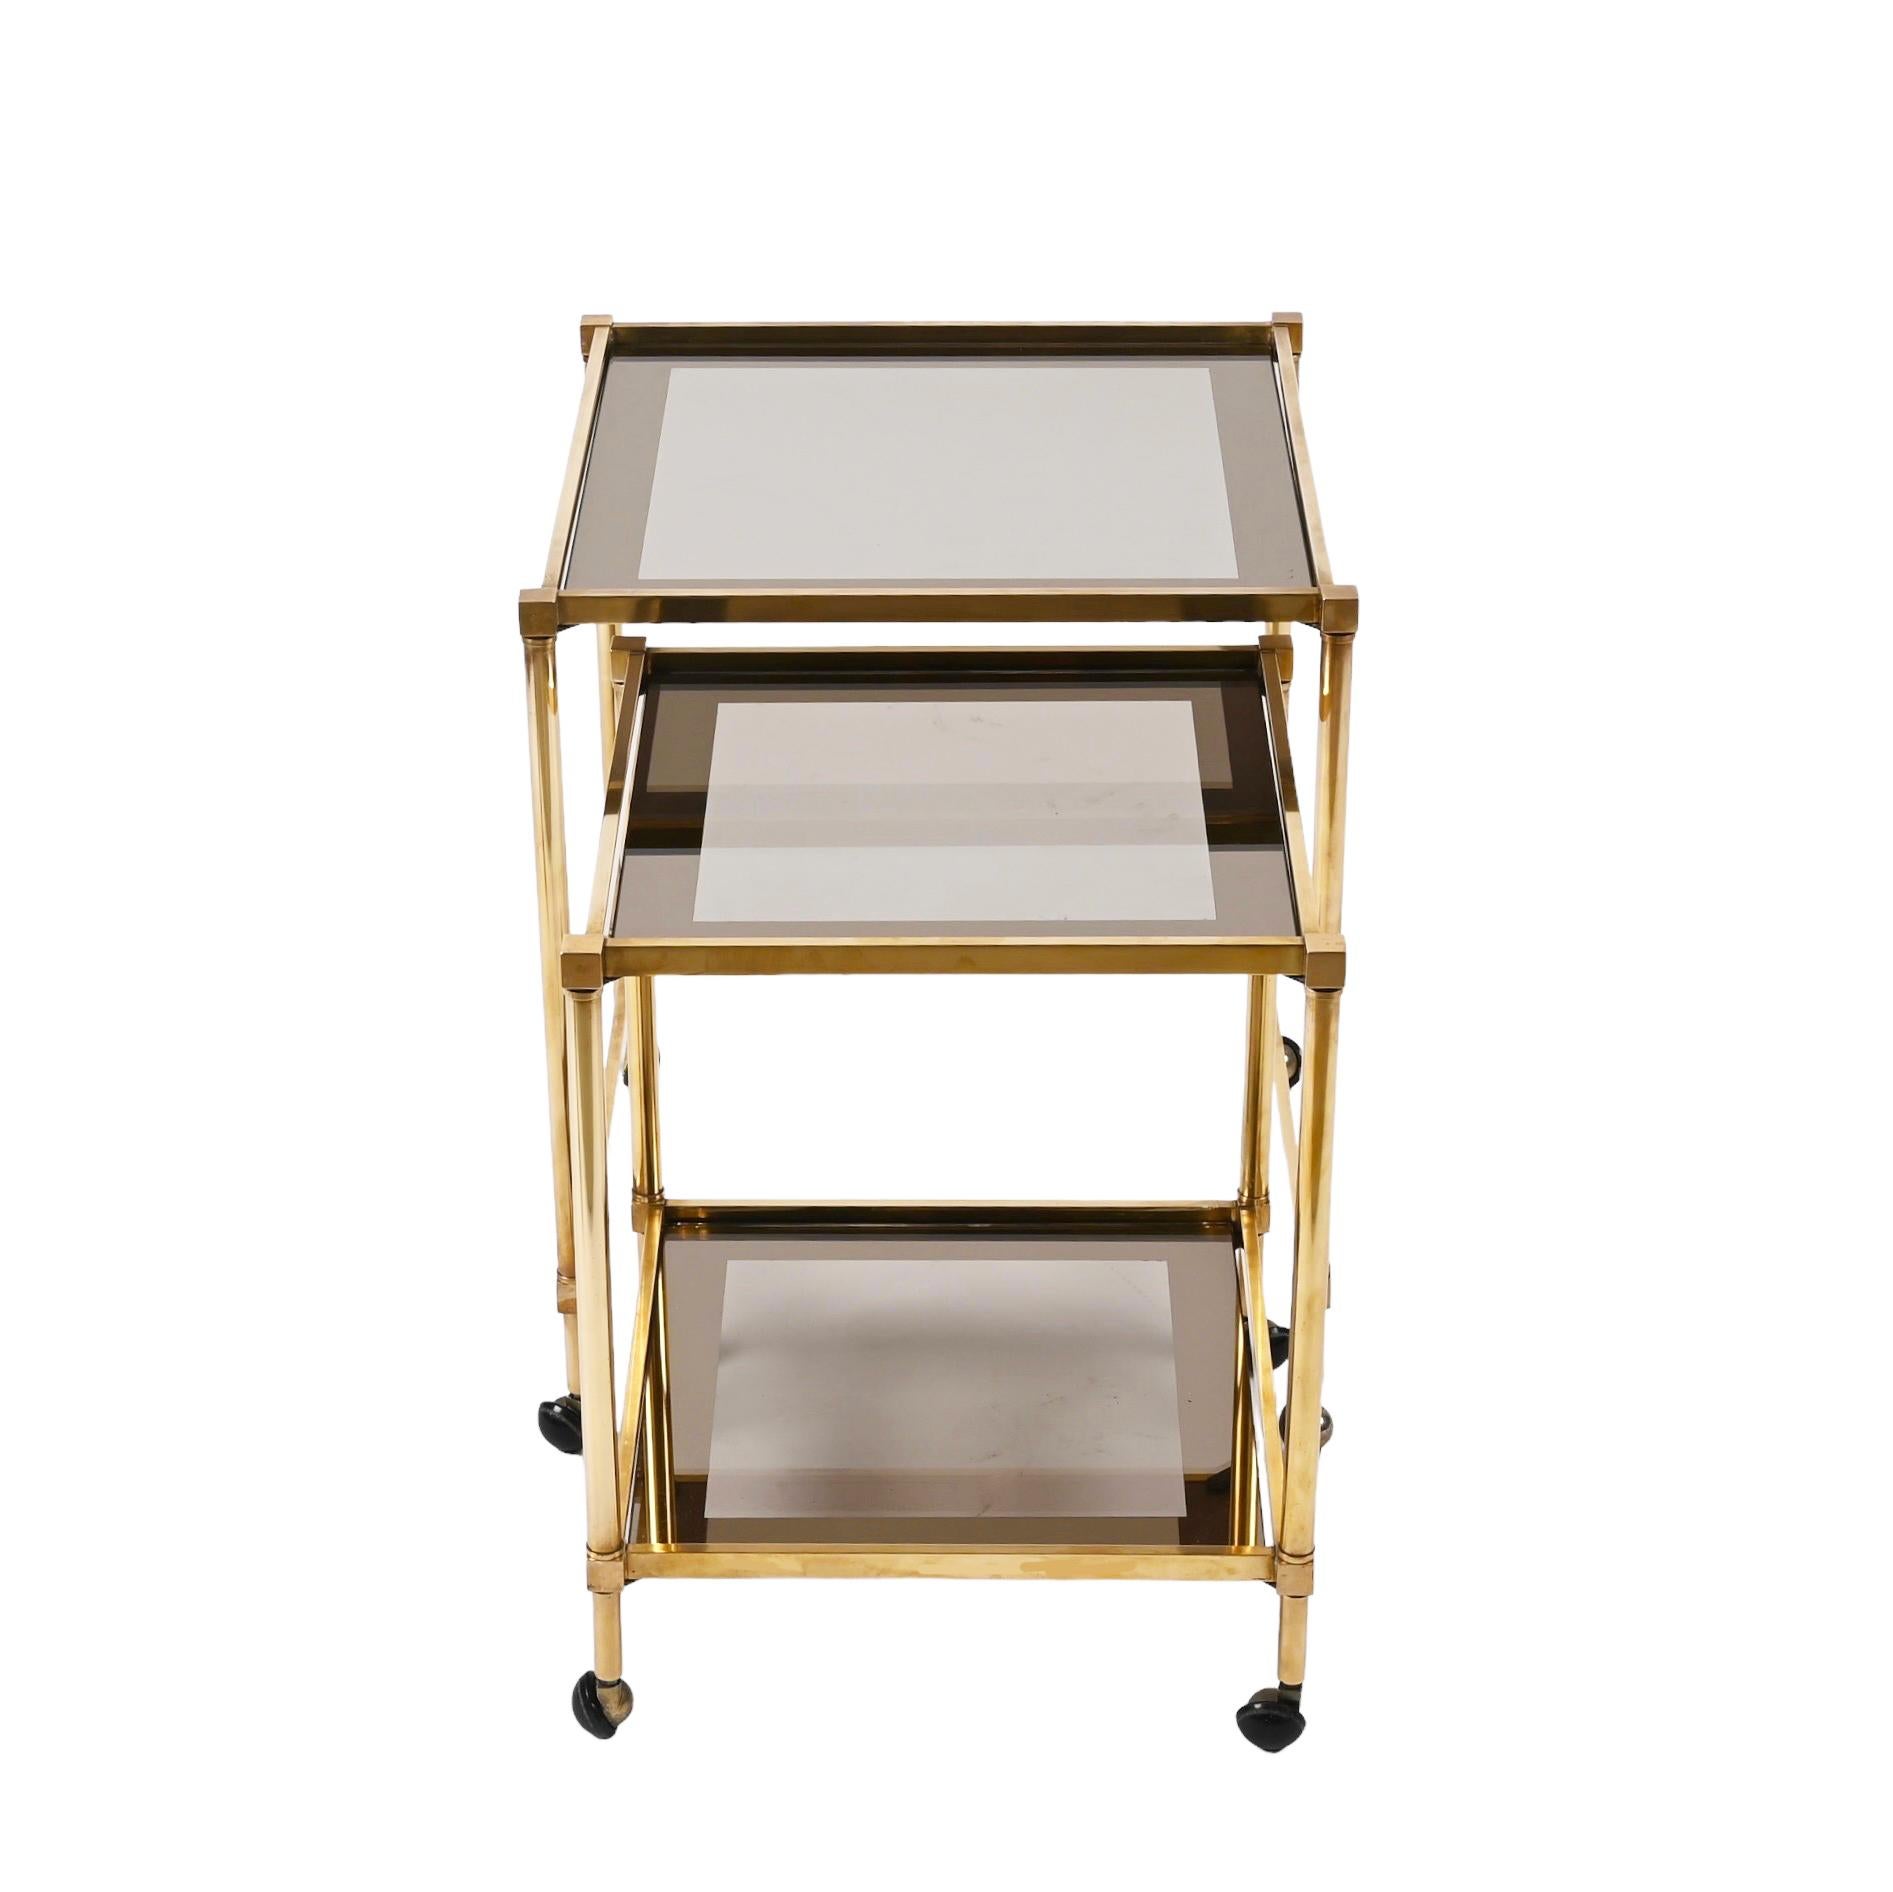 Pair of Maison Jansen Brass Mirrored Border Nesting Tables with Glass Top, 1970s For Sale 1